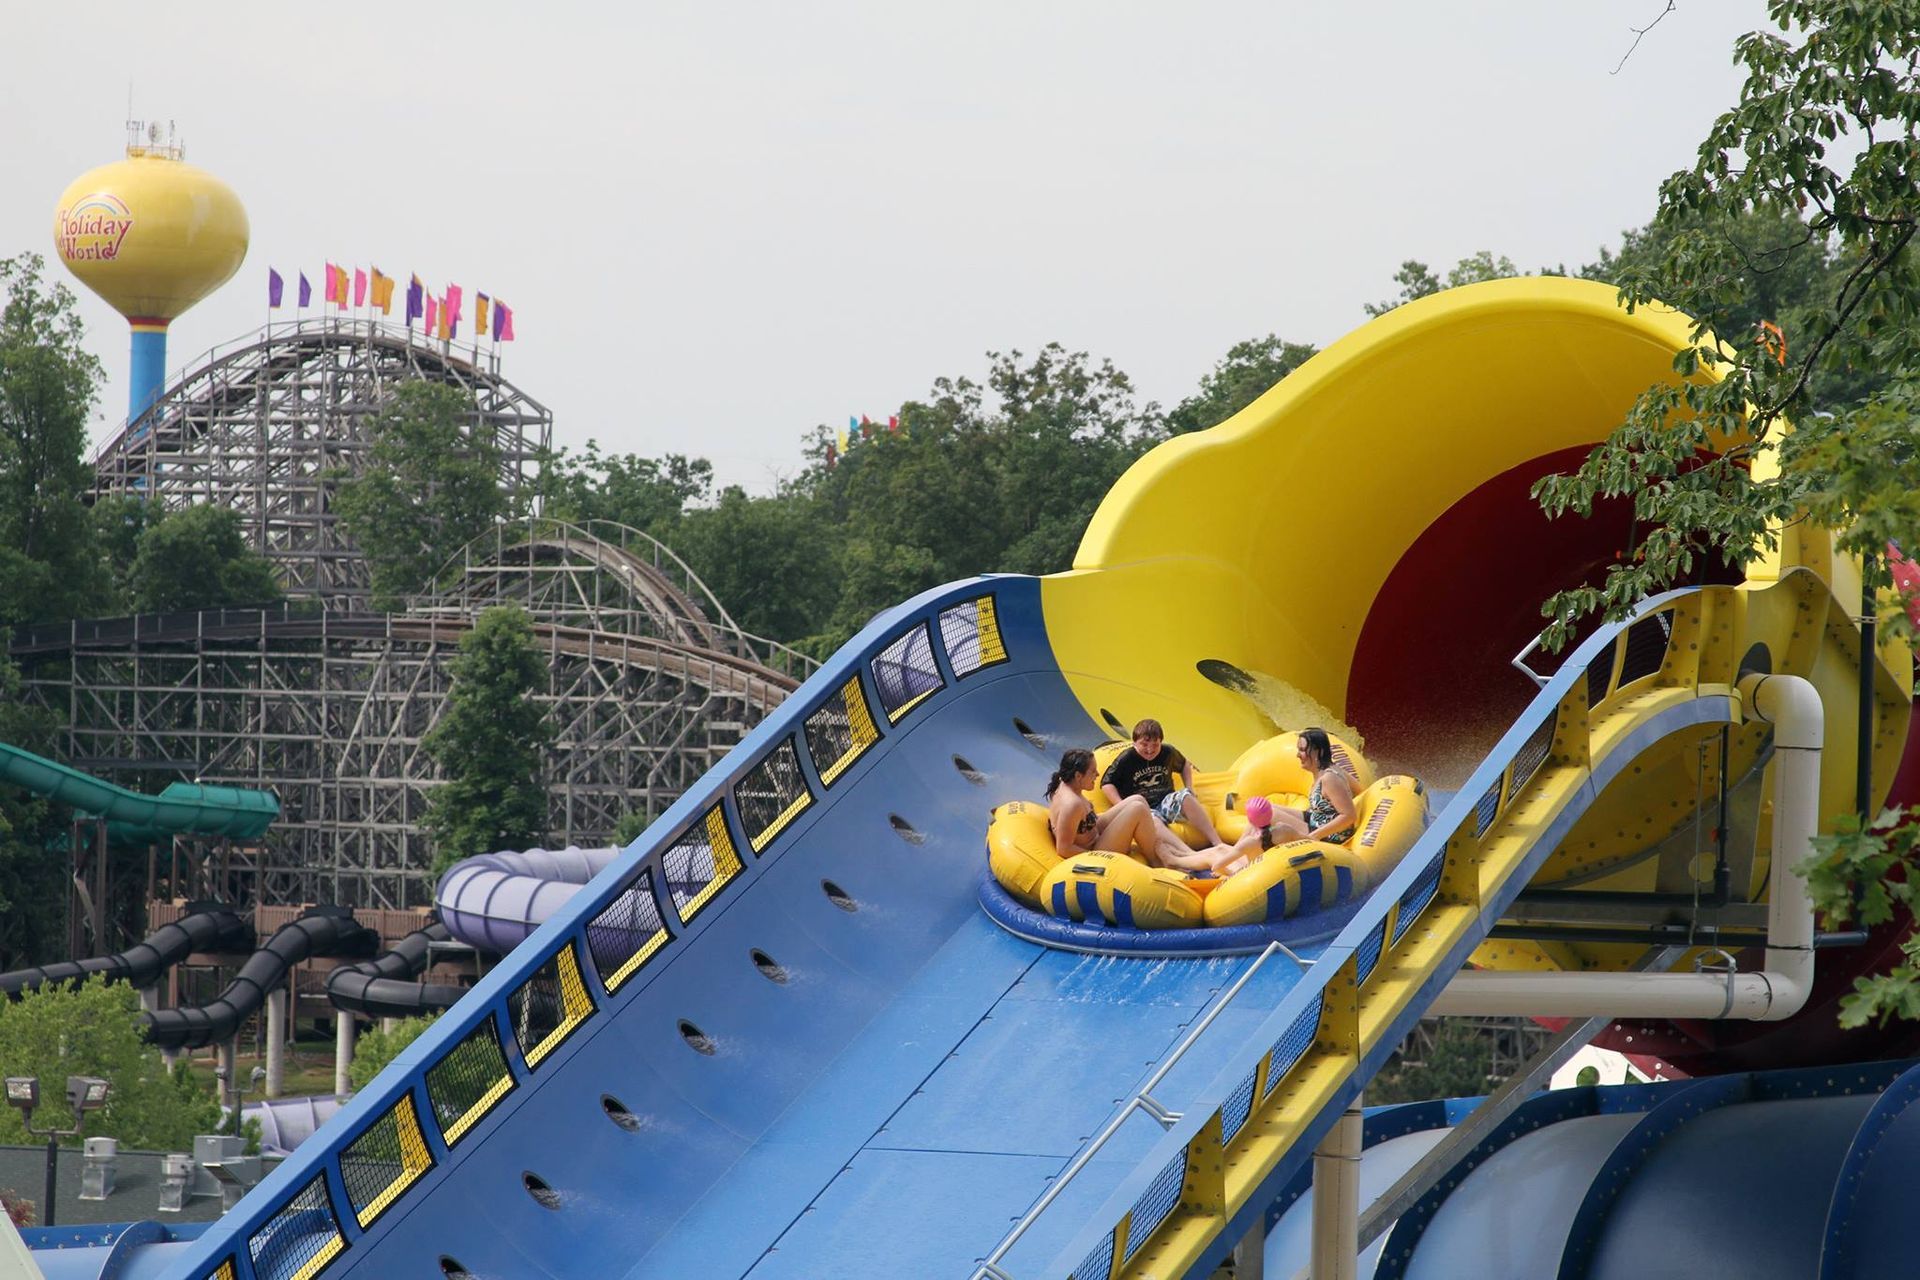 World's Longest Water Coaster: world record in Santa Claus, Indiana